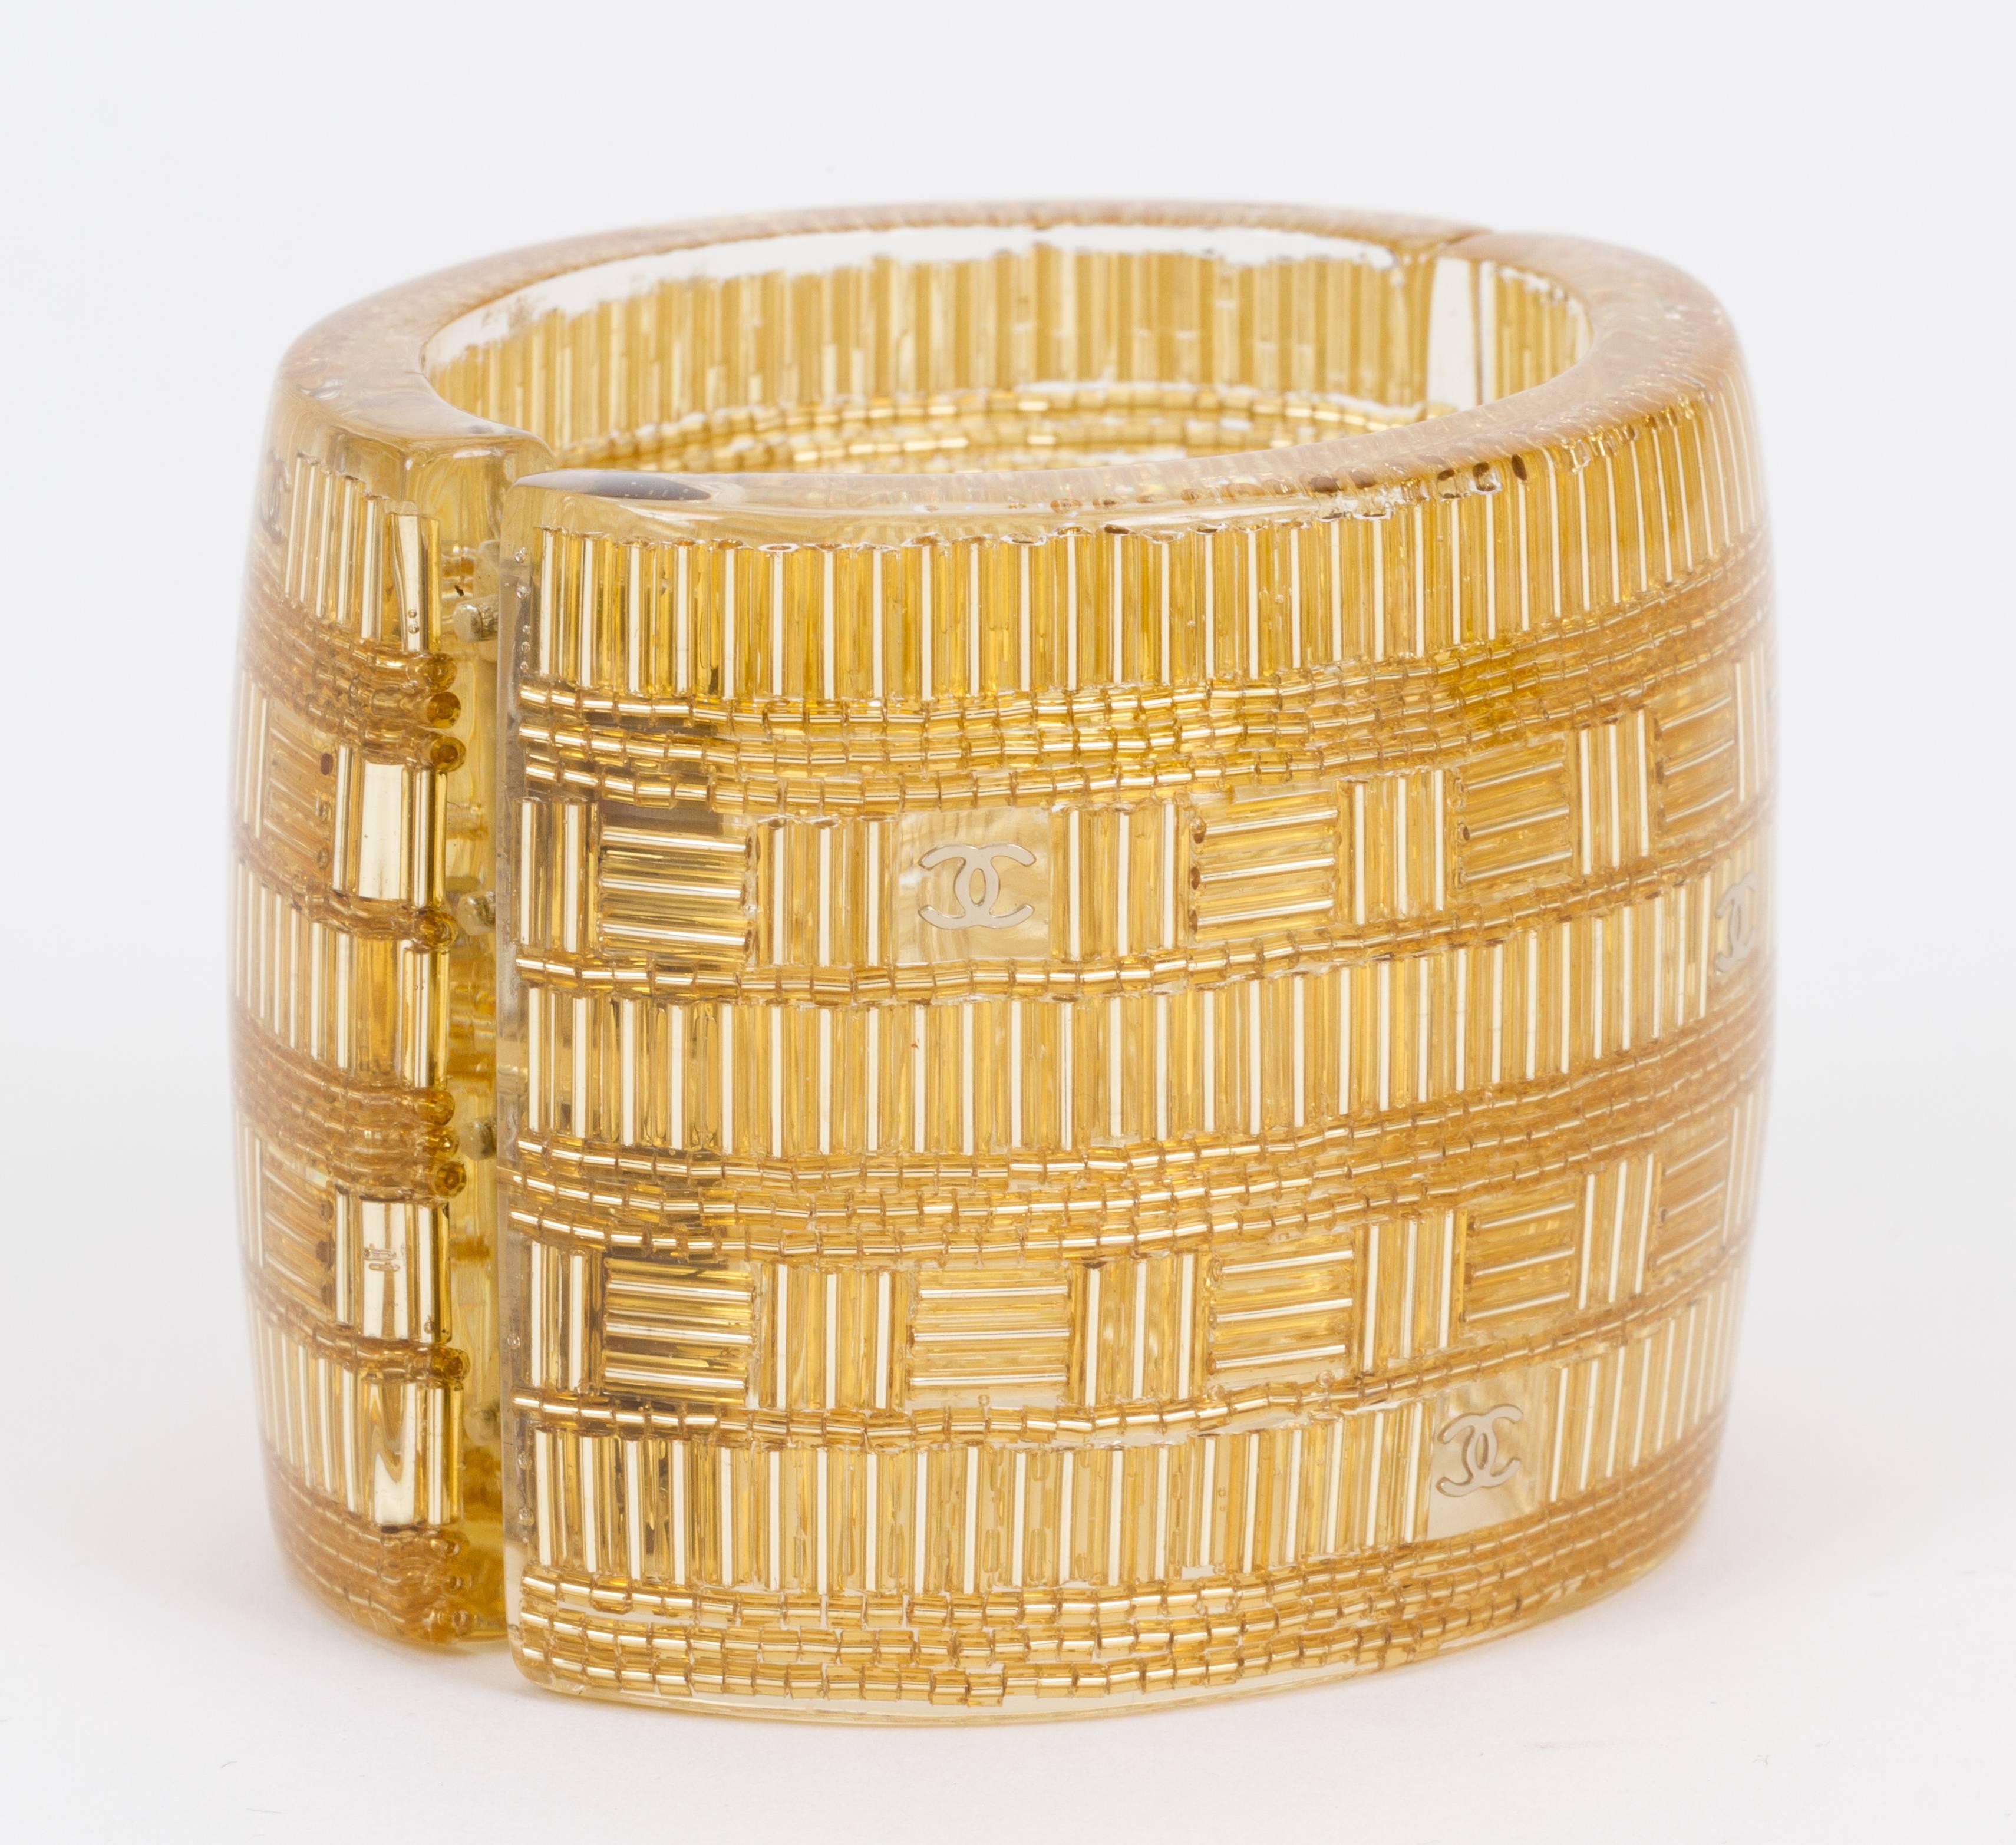 Chanel spring 2015 hinged lucite cuff bracelet. Gold and clear combination. Interior diameter 2 1/4